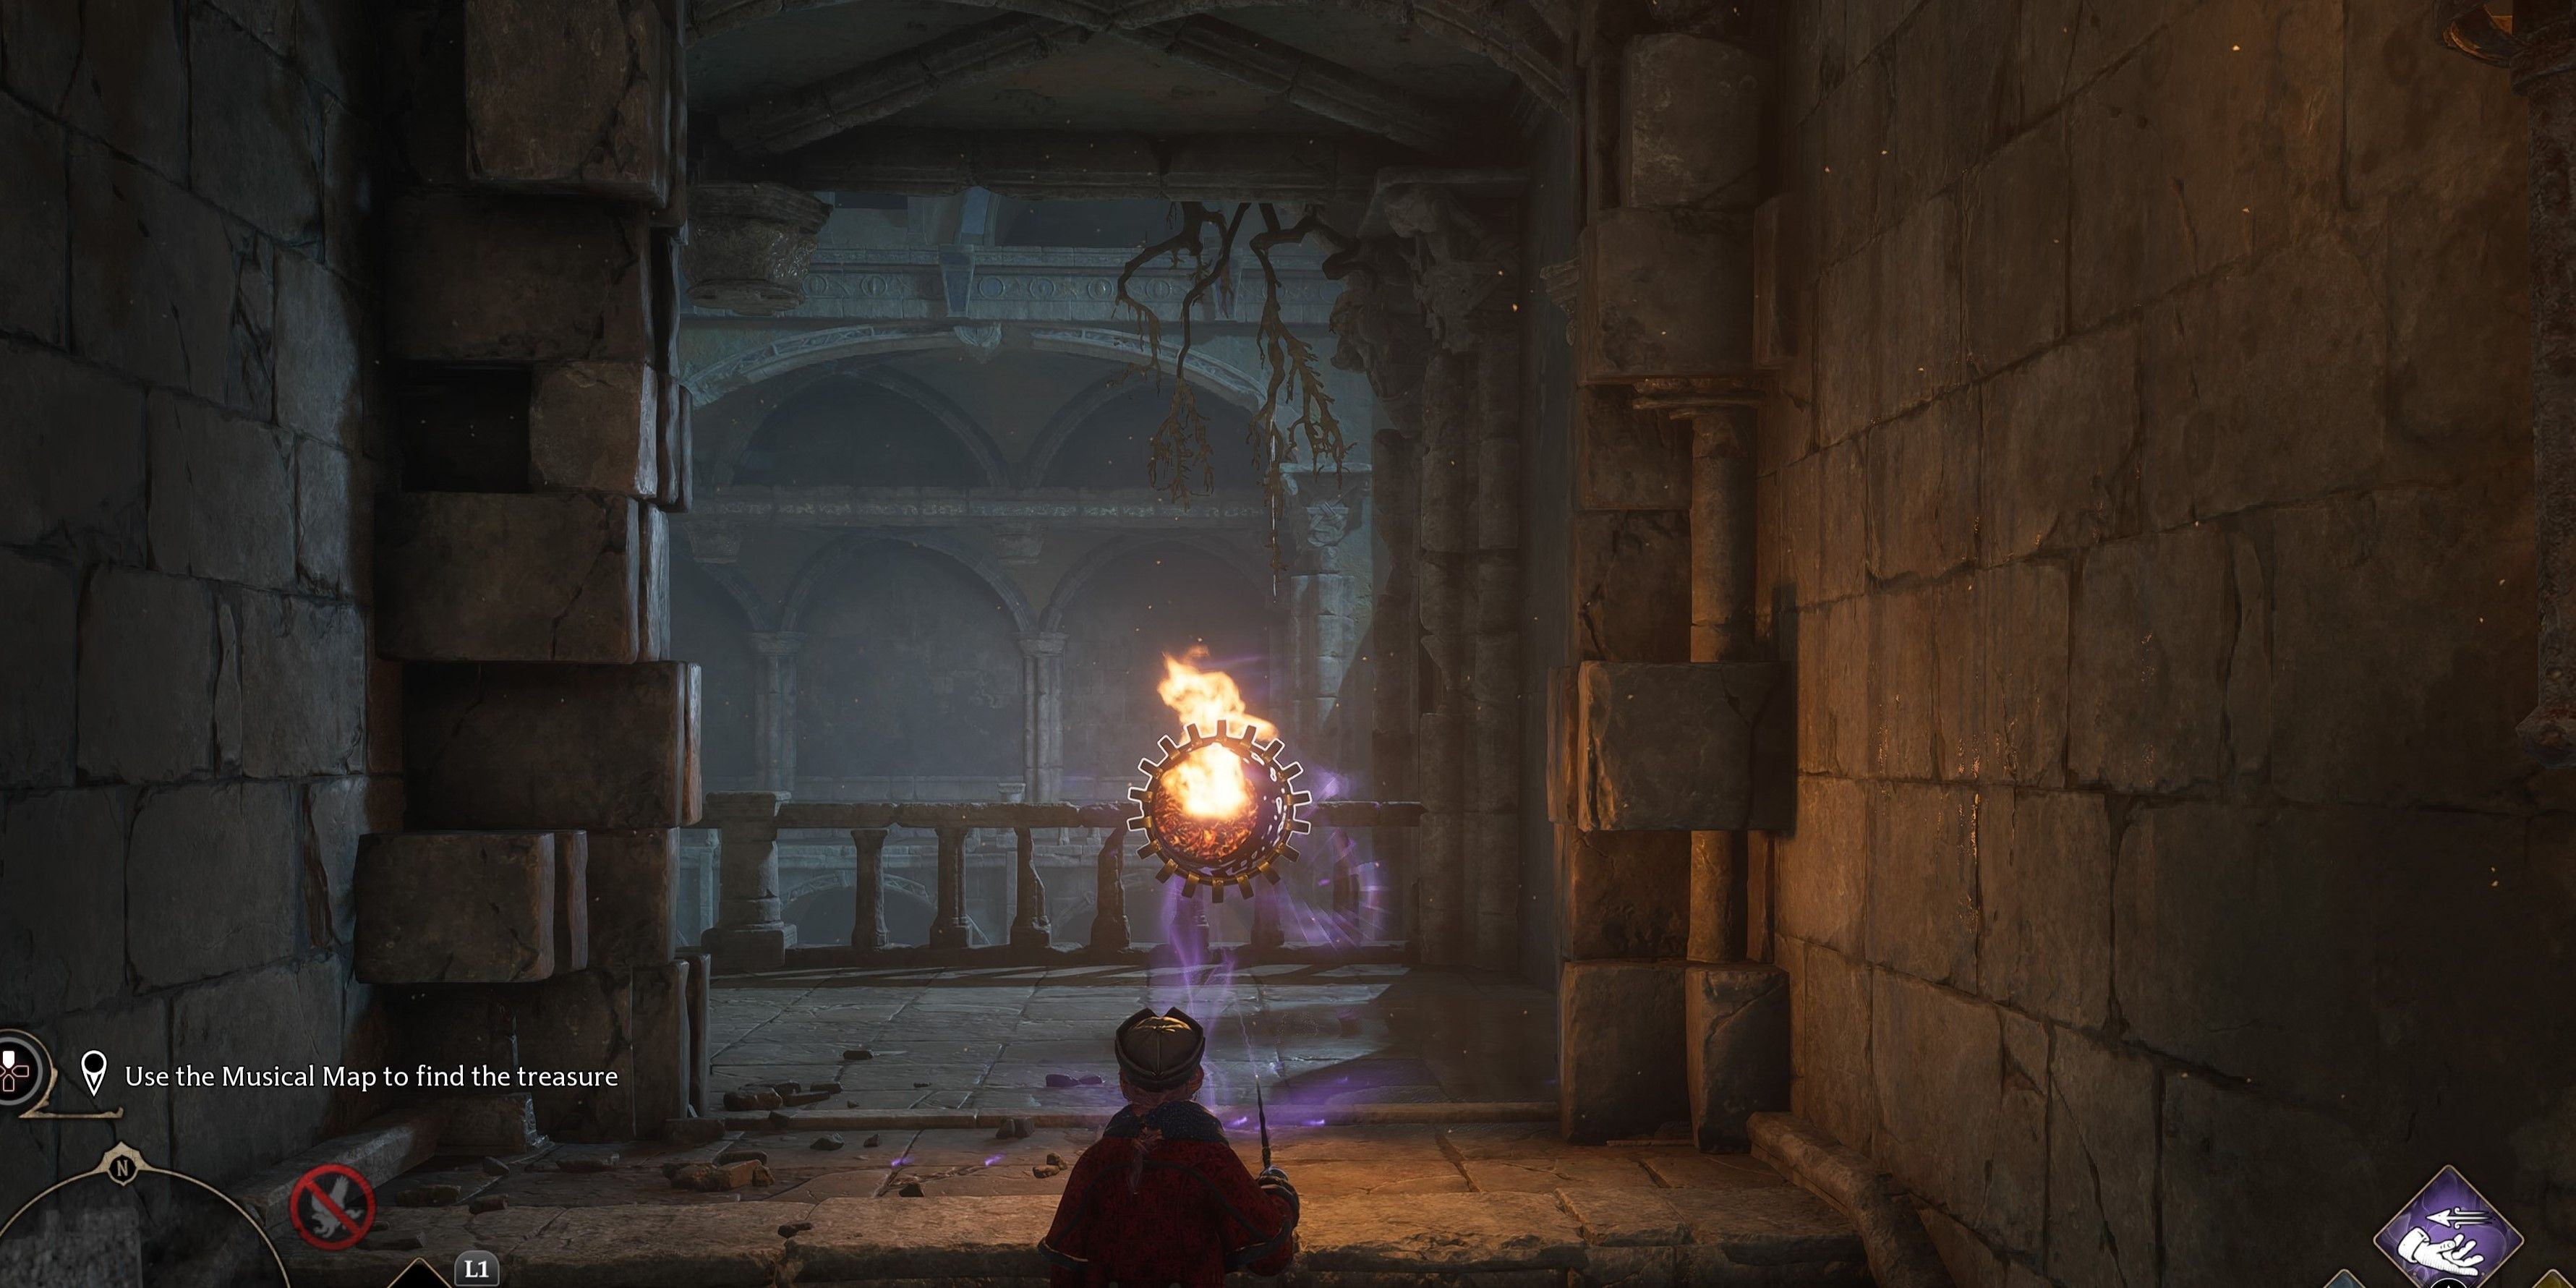 Use the fire basket to open the door in the Hogwarts Legacy